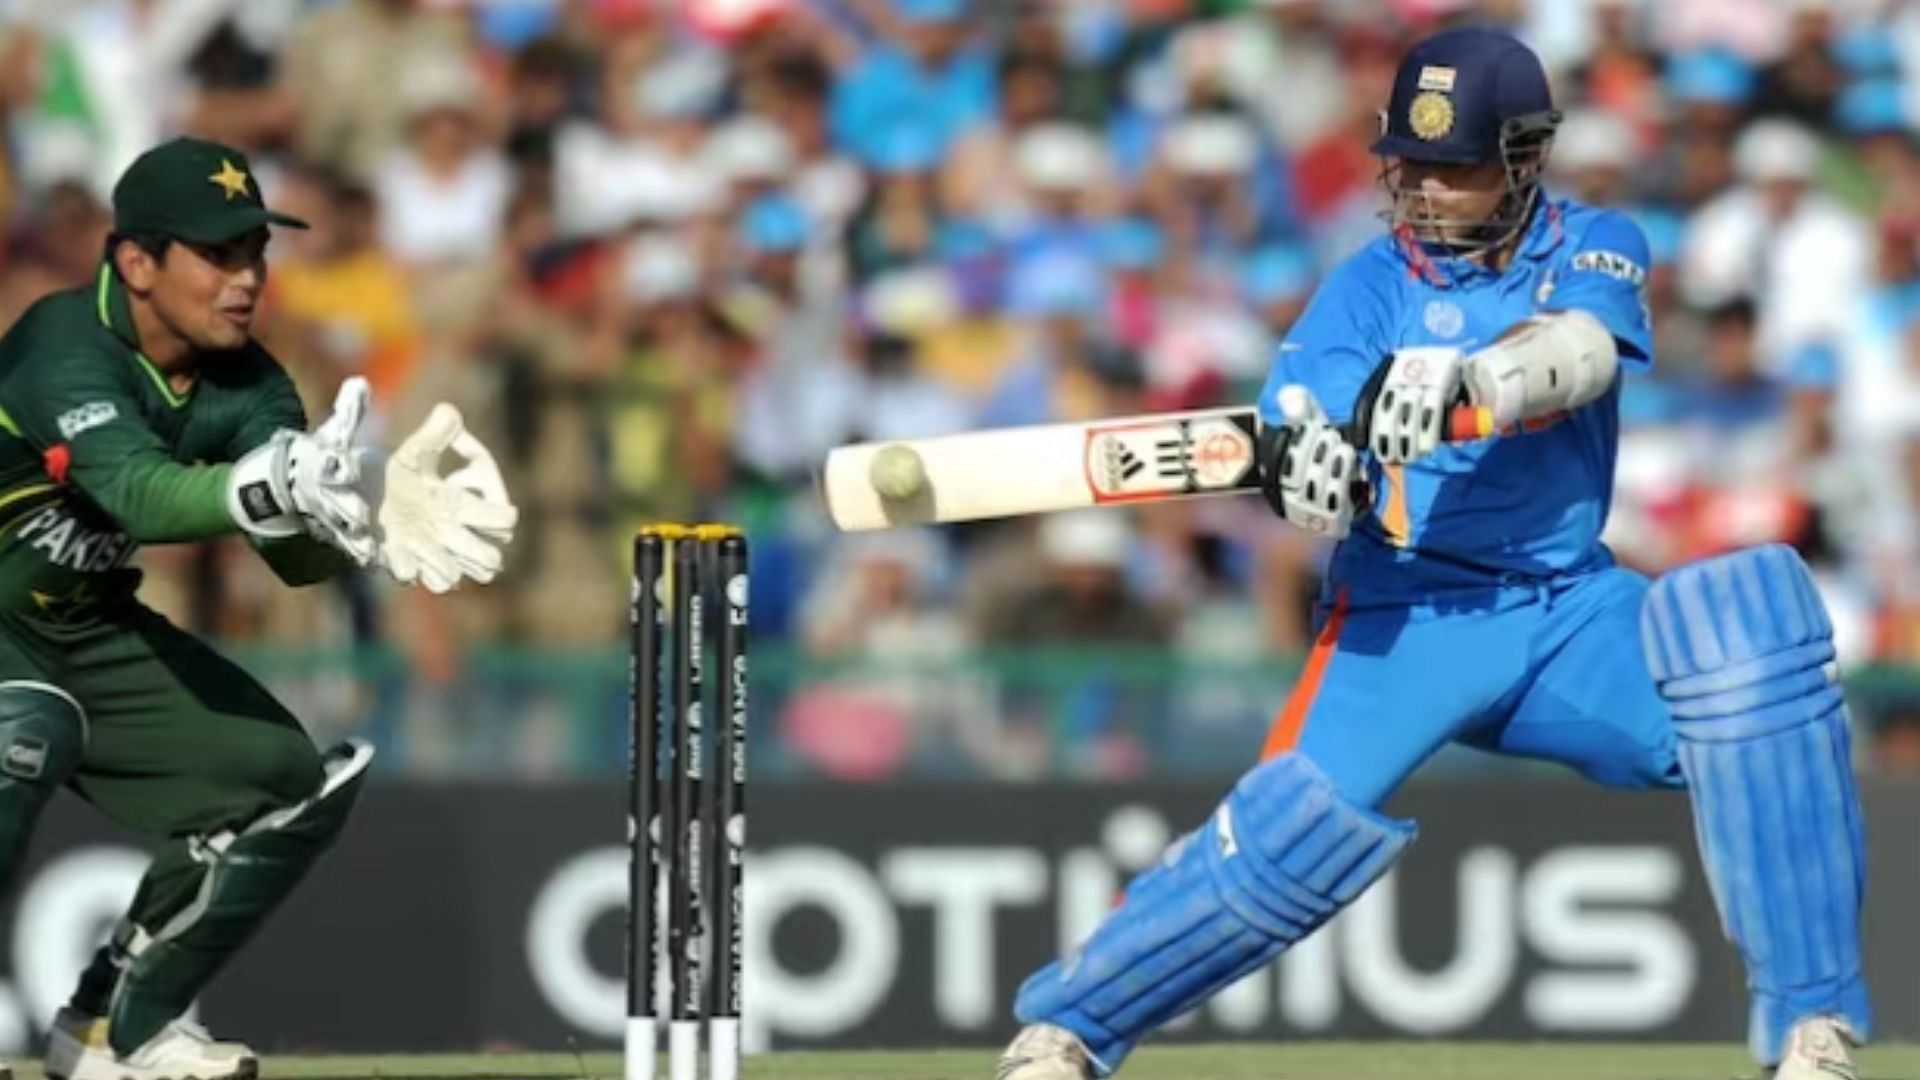 Sachin Tendulkar en route to his match-winning knock of 85 against Pakistan during the 2011 WC semi-final (Pic:AFP)